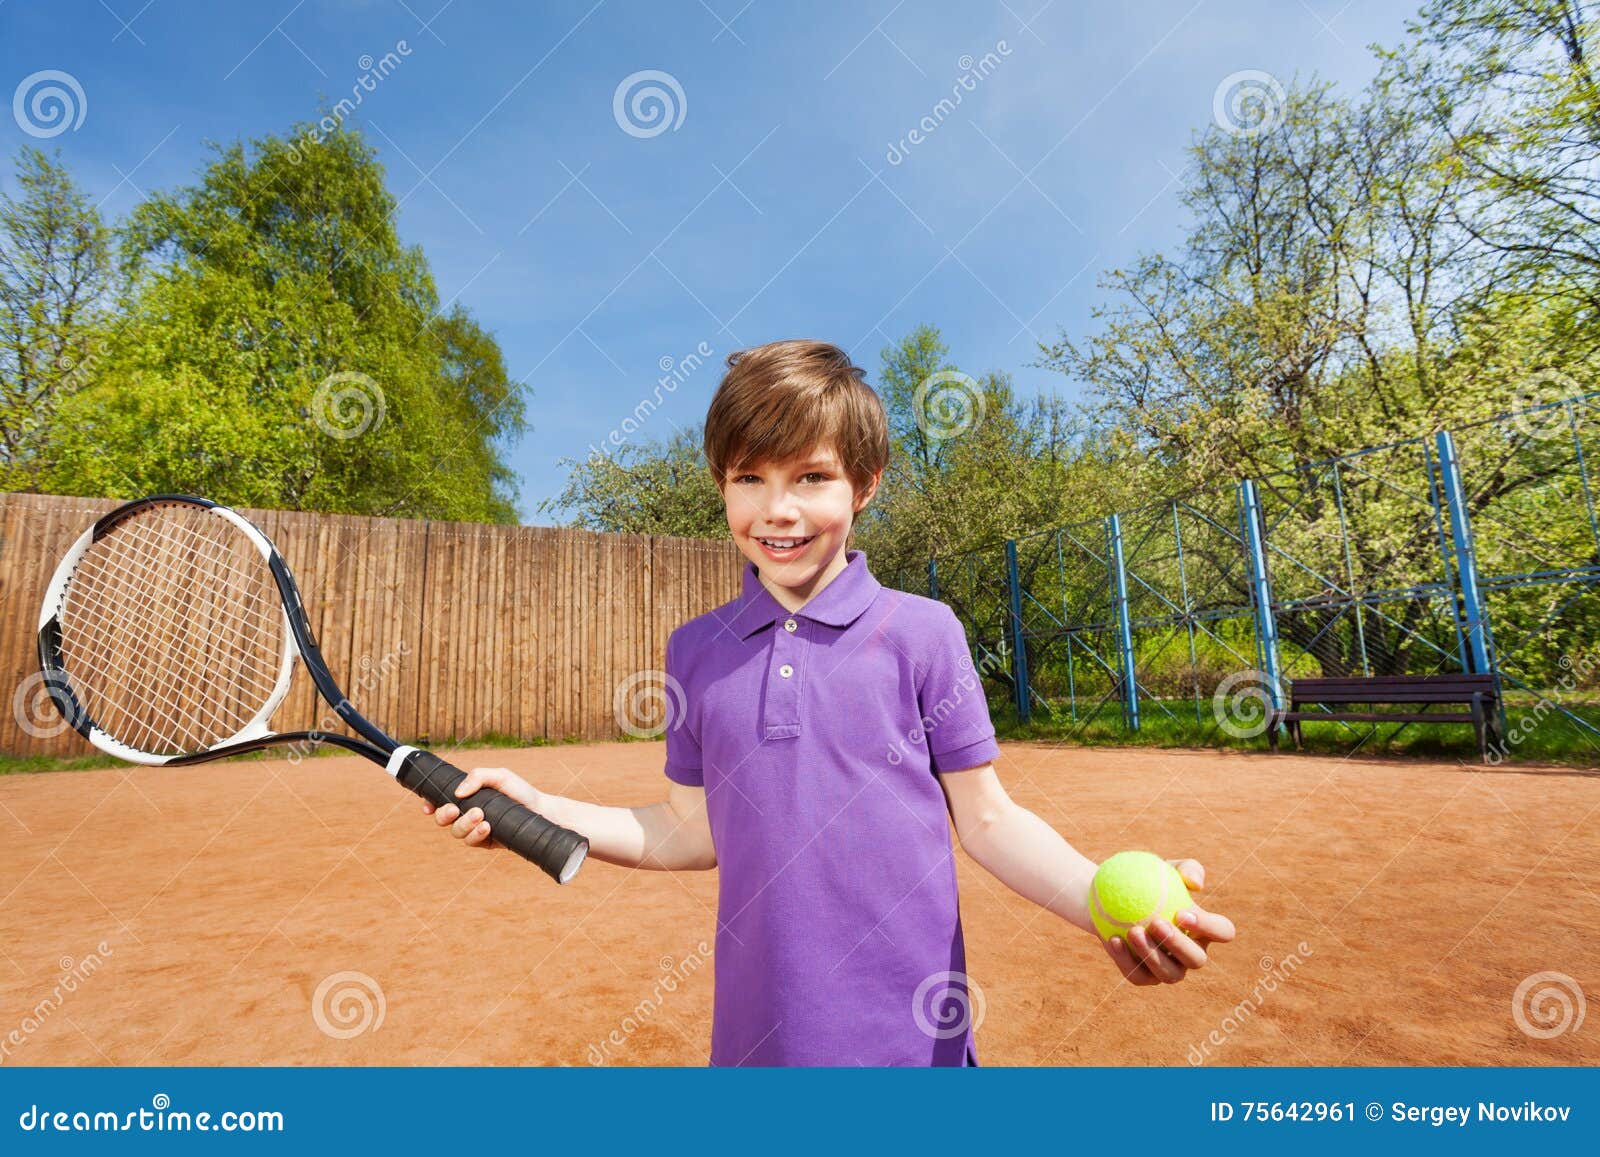 3 233 Tennis Ball Boy Photos Free Royalty Free Stock Photos From Dreamstime